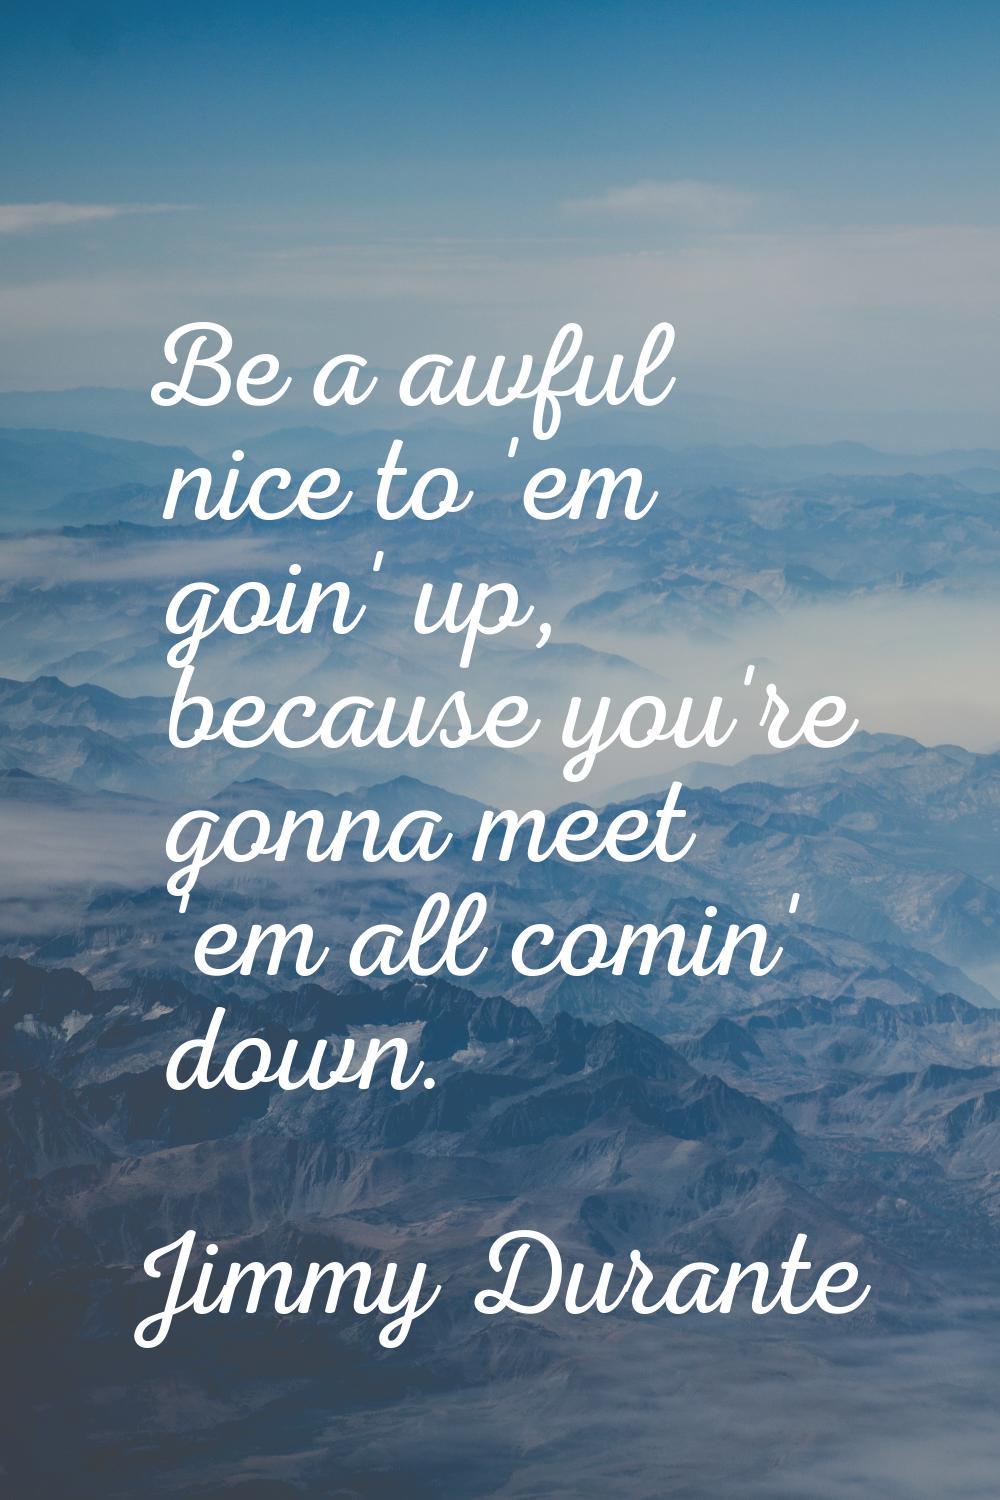 Be a awful nice to 'em goin' up, because you're gonna meet 'em all comin' down.